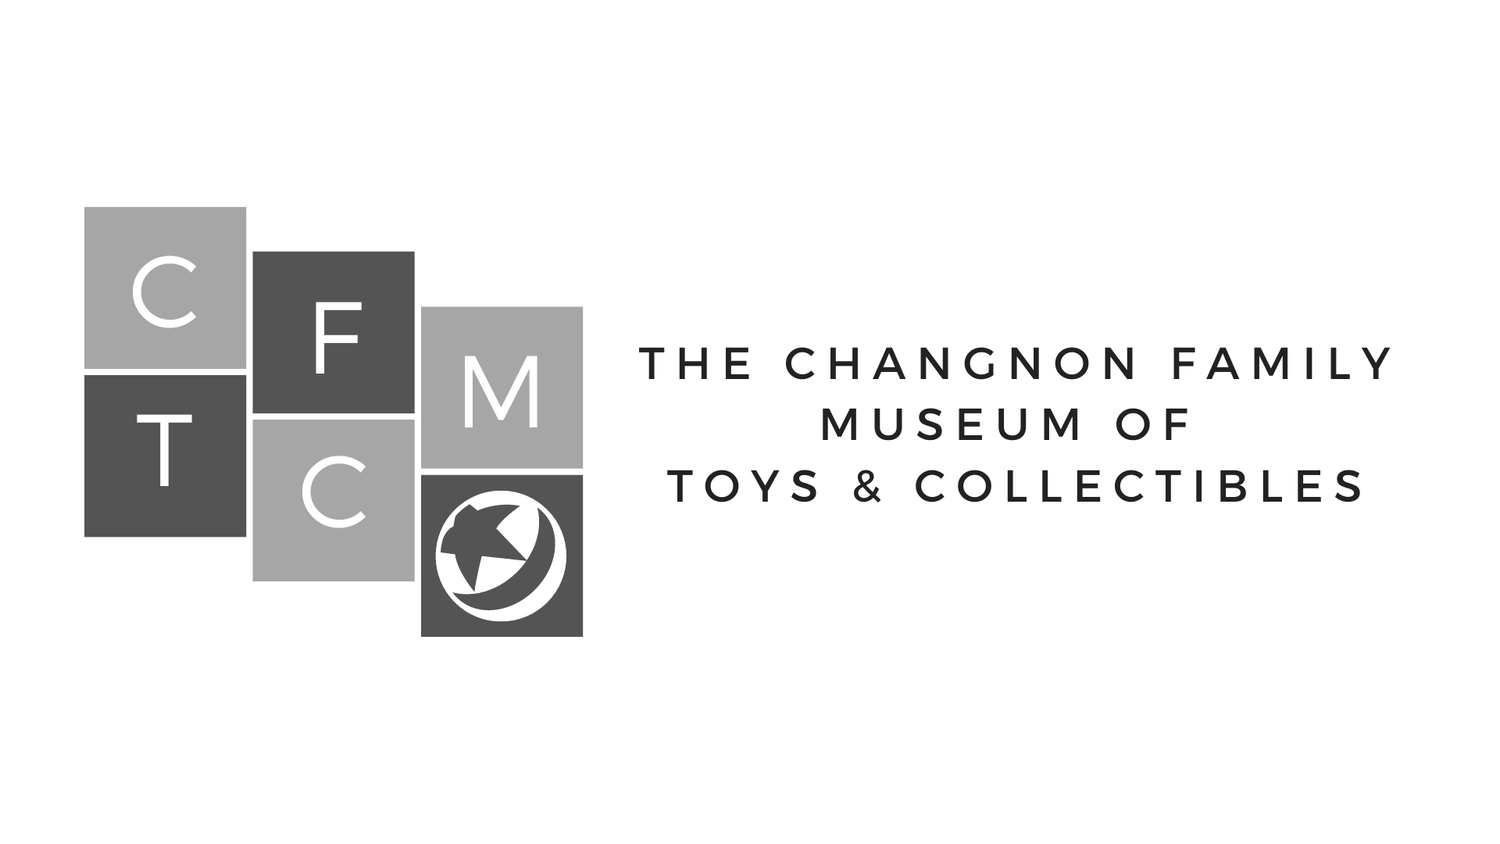 The Changnon Family Museum of Toys and Collectibles